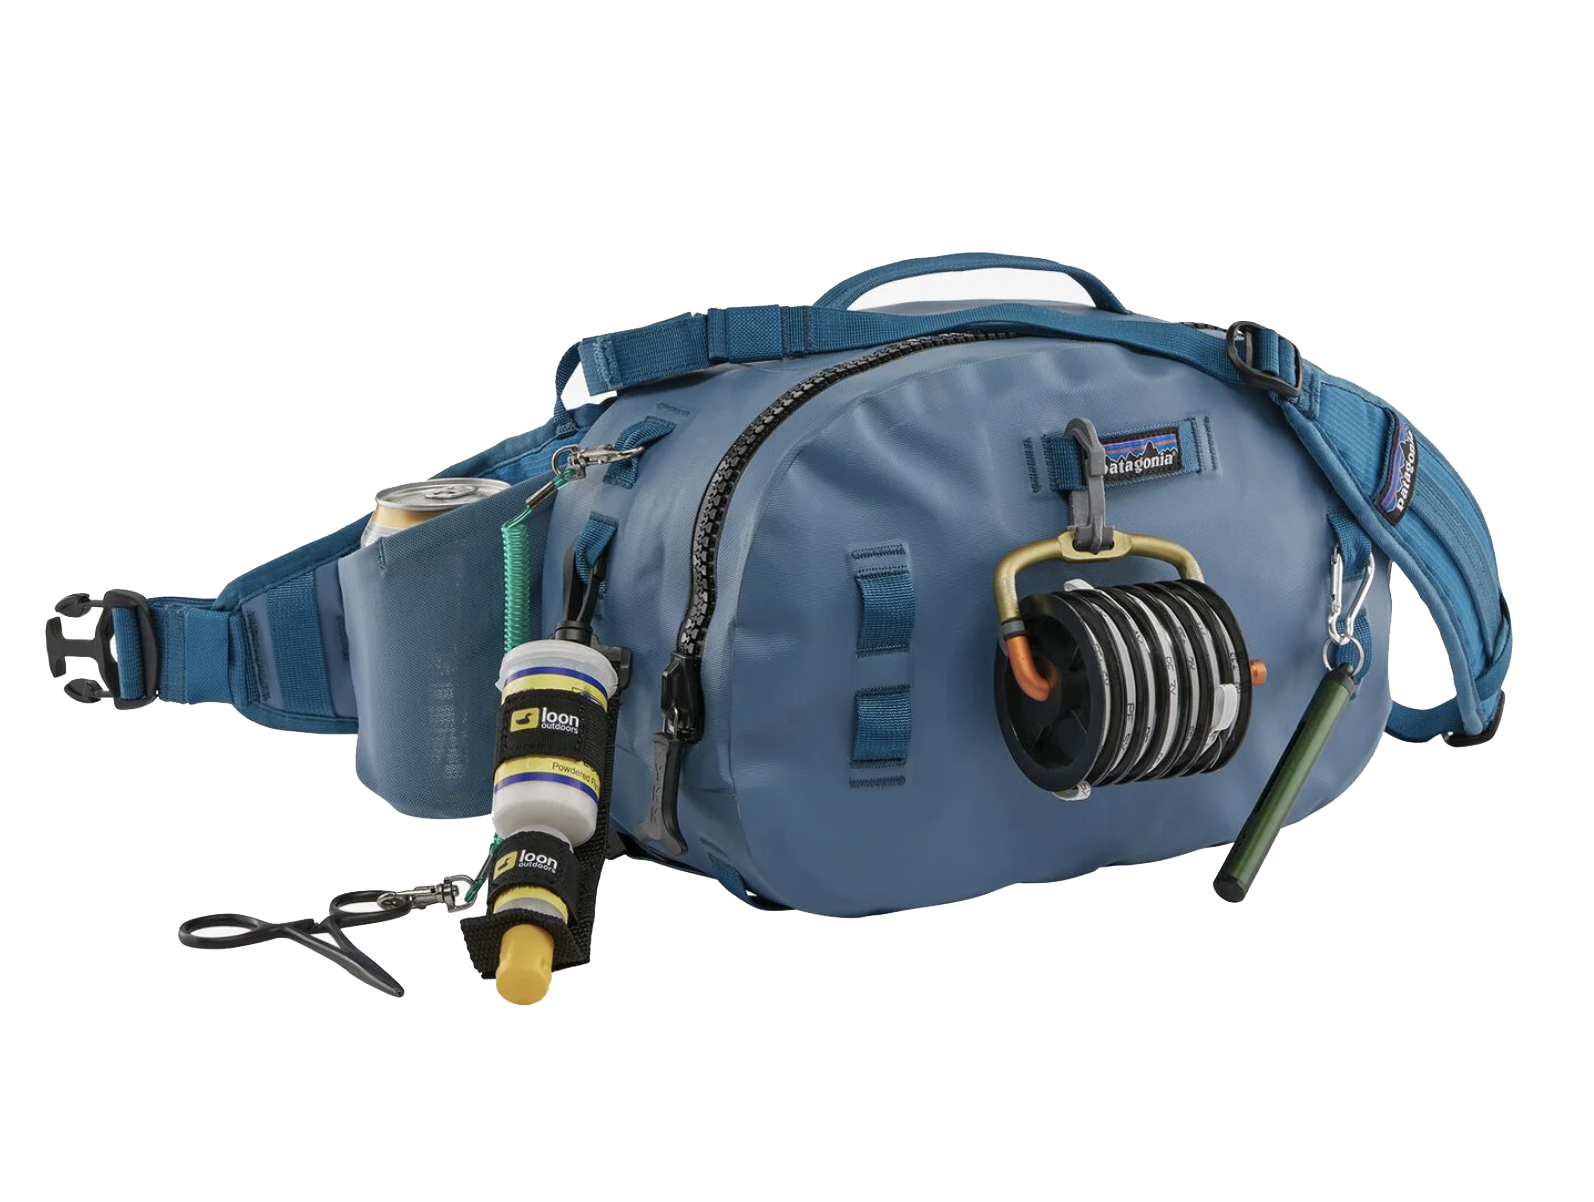 Patagonia Guidewater Hip Pack – Mangrove Outfitters Fly Shop